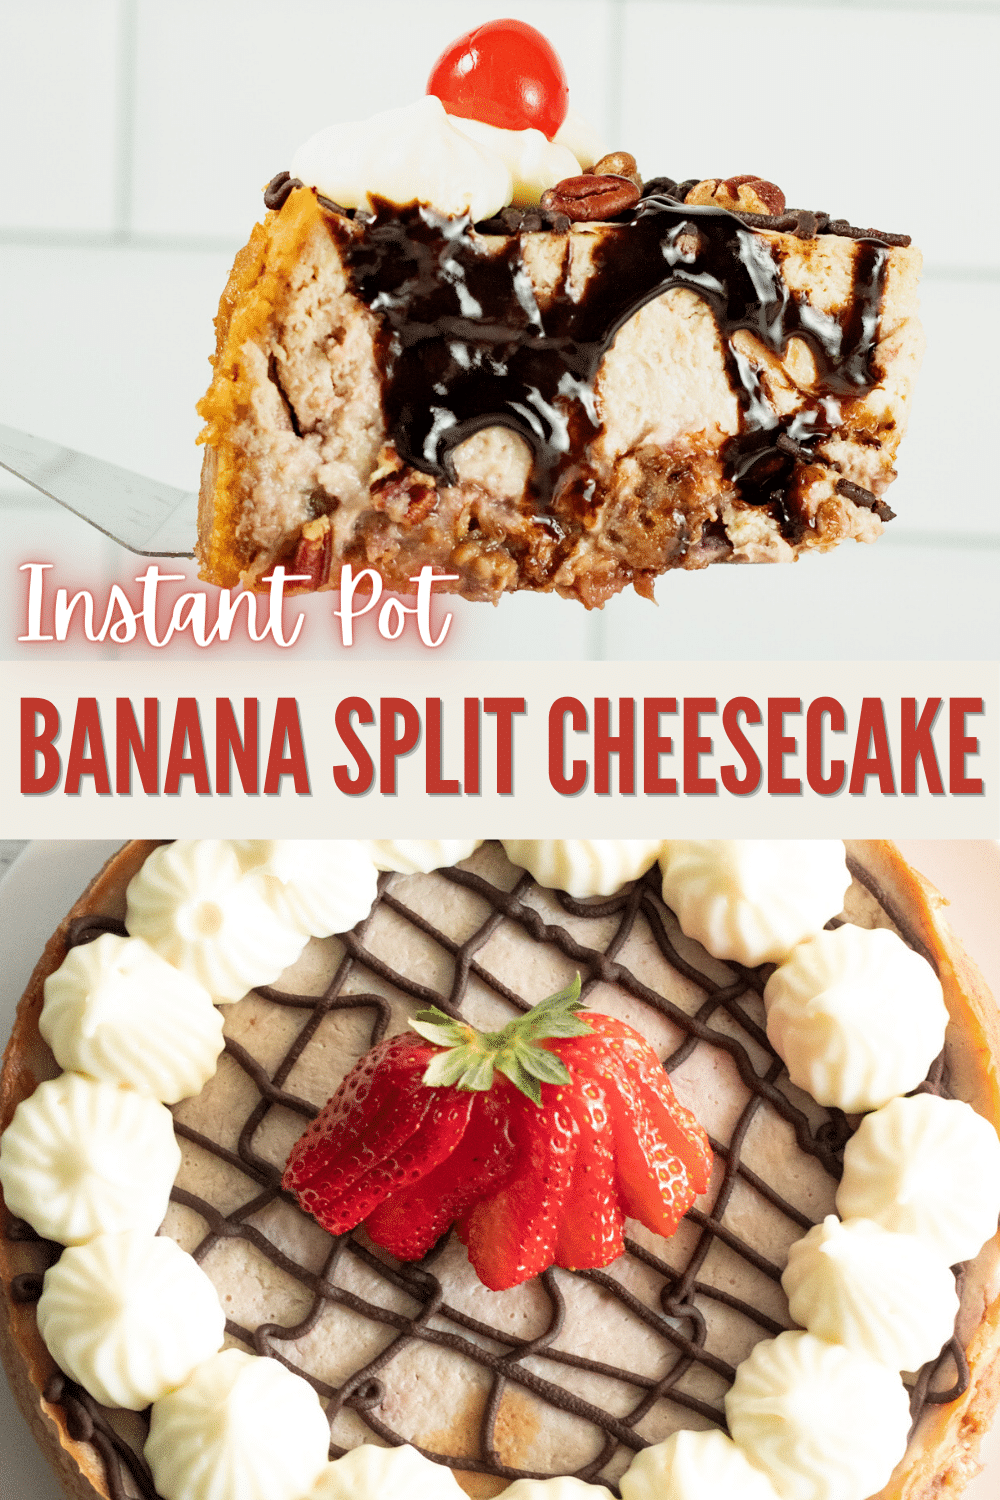 Instant Pot Banana Split Cheesecake is about to make you forget that other cheesecakes exist. The flavor of this cheesecake recipe rocks. #instantpot #pressurecooker #bananasplit #cheesecake #recipe via @wondermomwannab